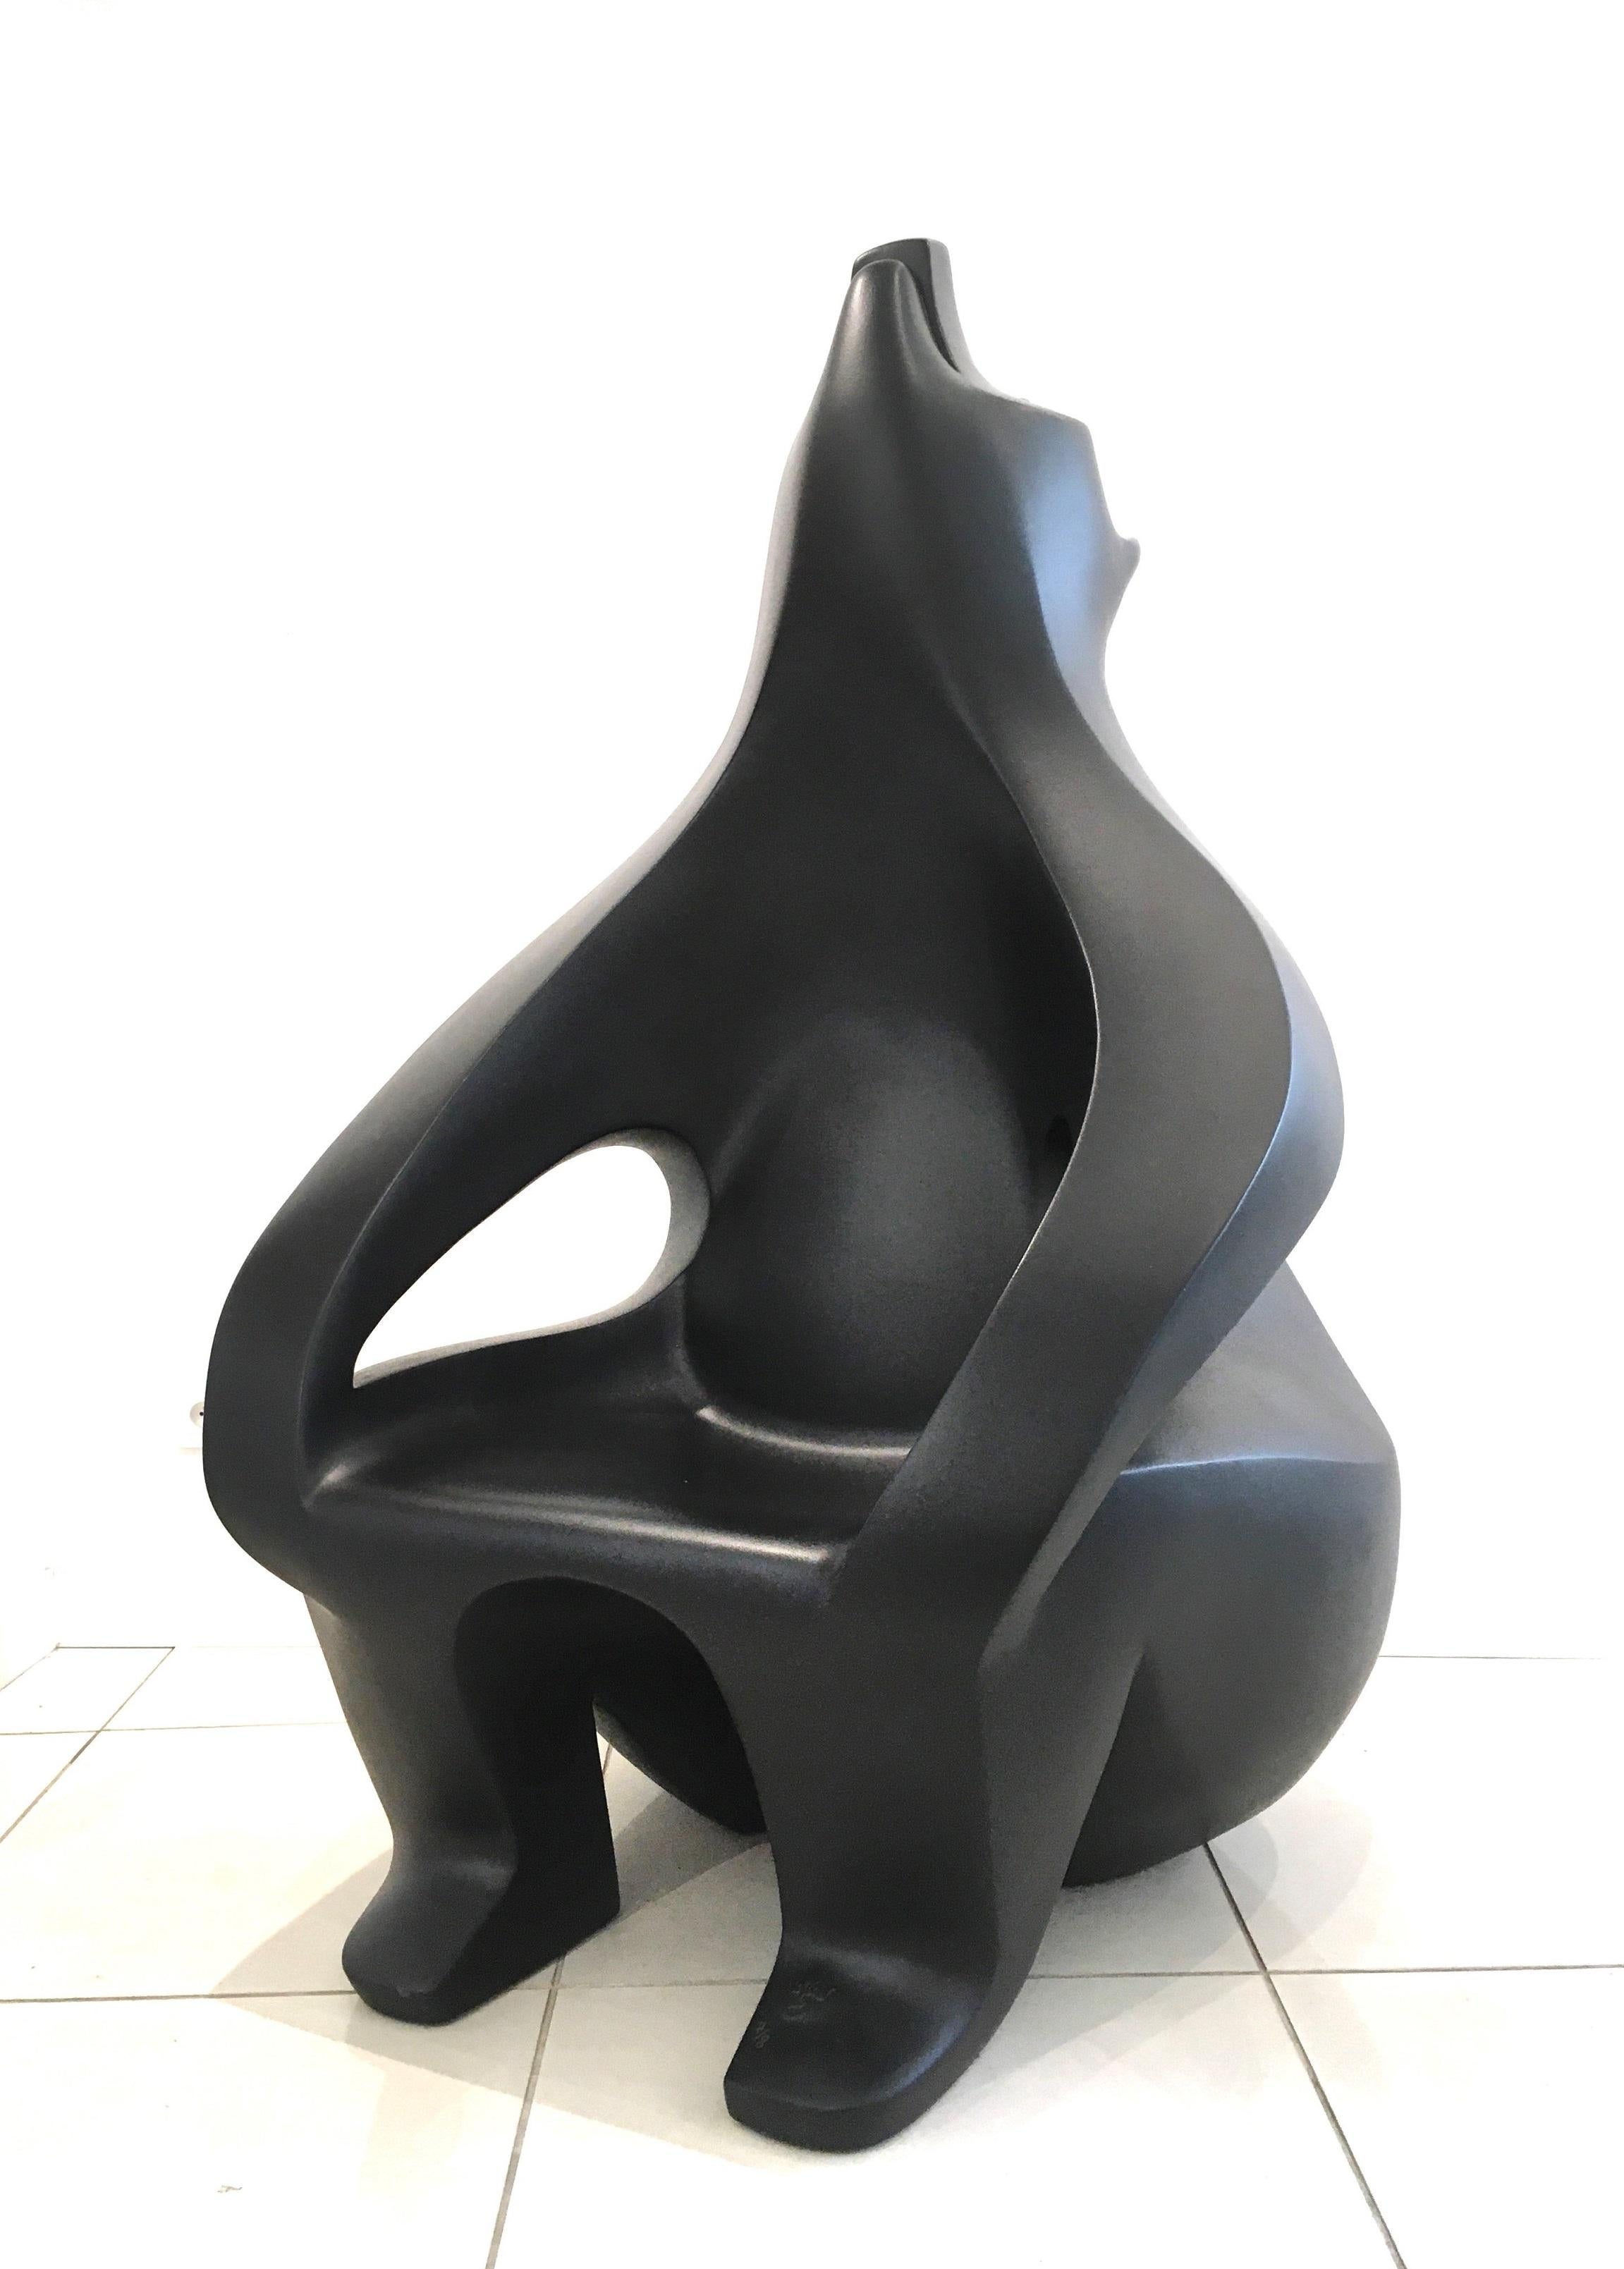 The Great Bear is a polyester sculpture by contemporary artist Eric Valat, dimensions are 160 cm × 95 cm × 90 cm (63 × 37.4 × 35.4 in). The sculpture is signed and numbered, it is part of a limited edition of 8 editions + 4 artist’s proofs, and